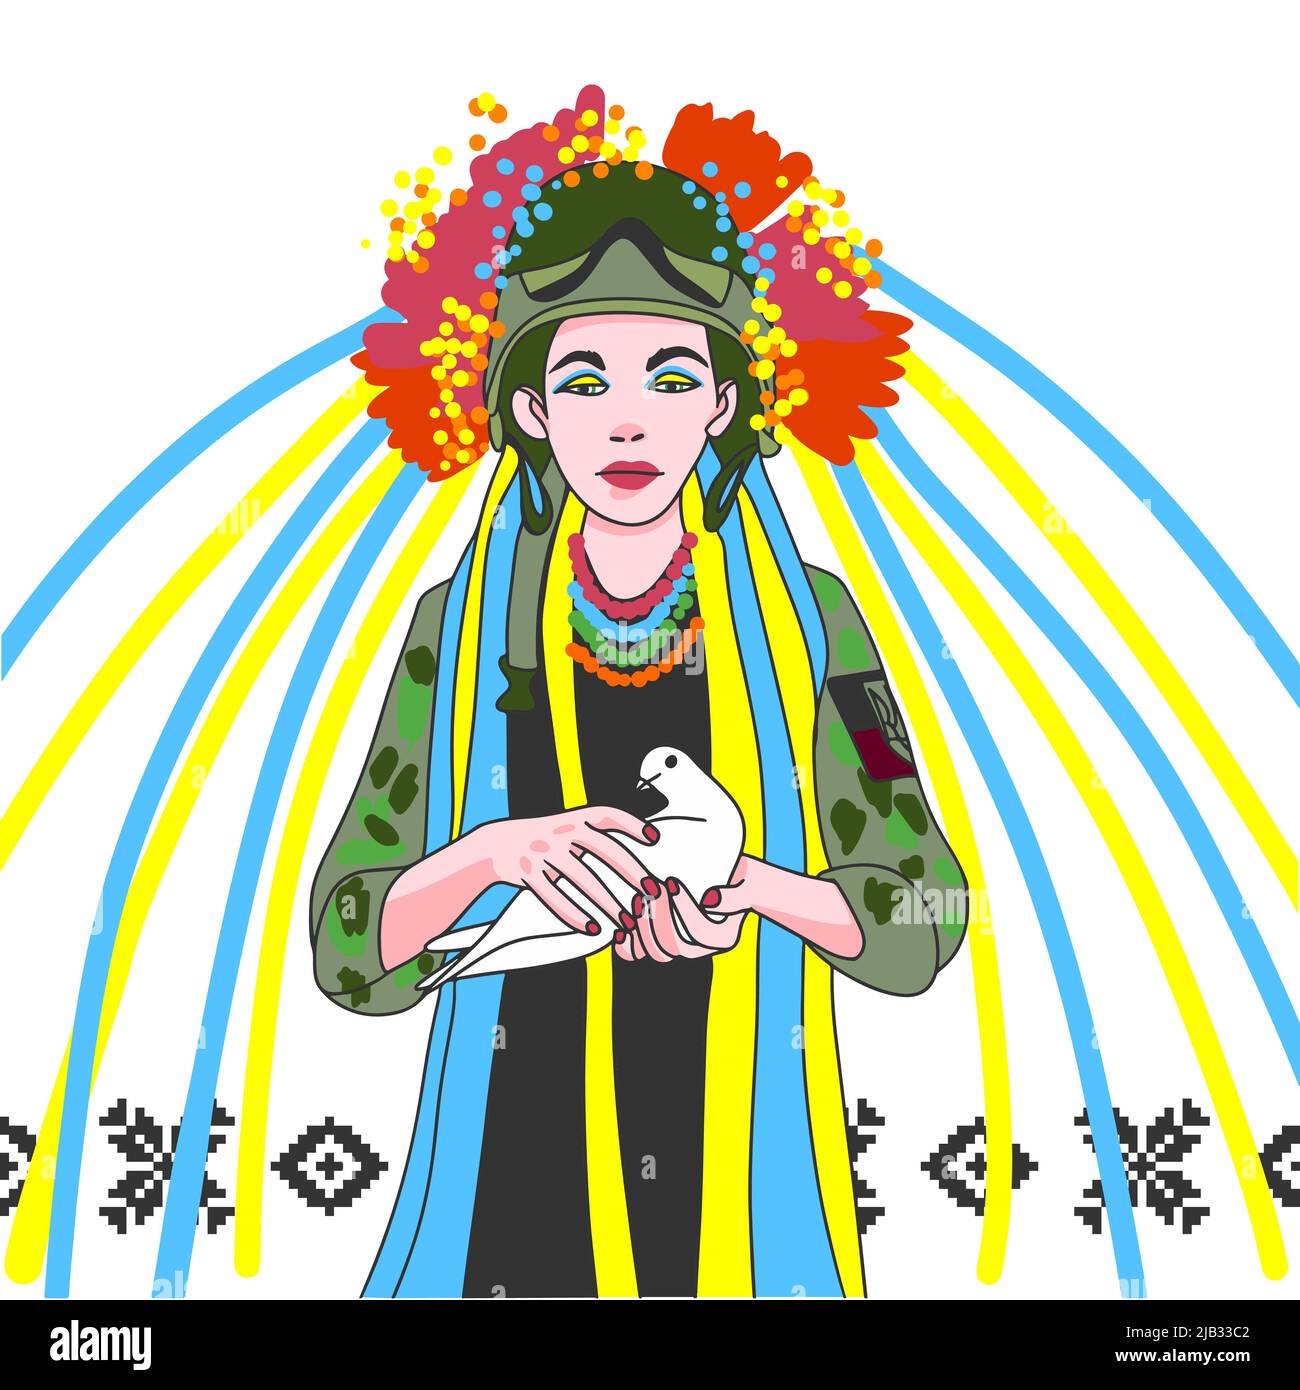 Ukrainian warrior in a wreath on his head, holding a dove in his hands, symbols of the flag of Ukraine. Young girl dressed as an army soldier Stock Vector